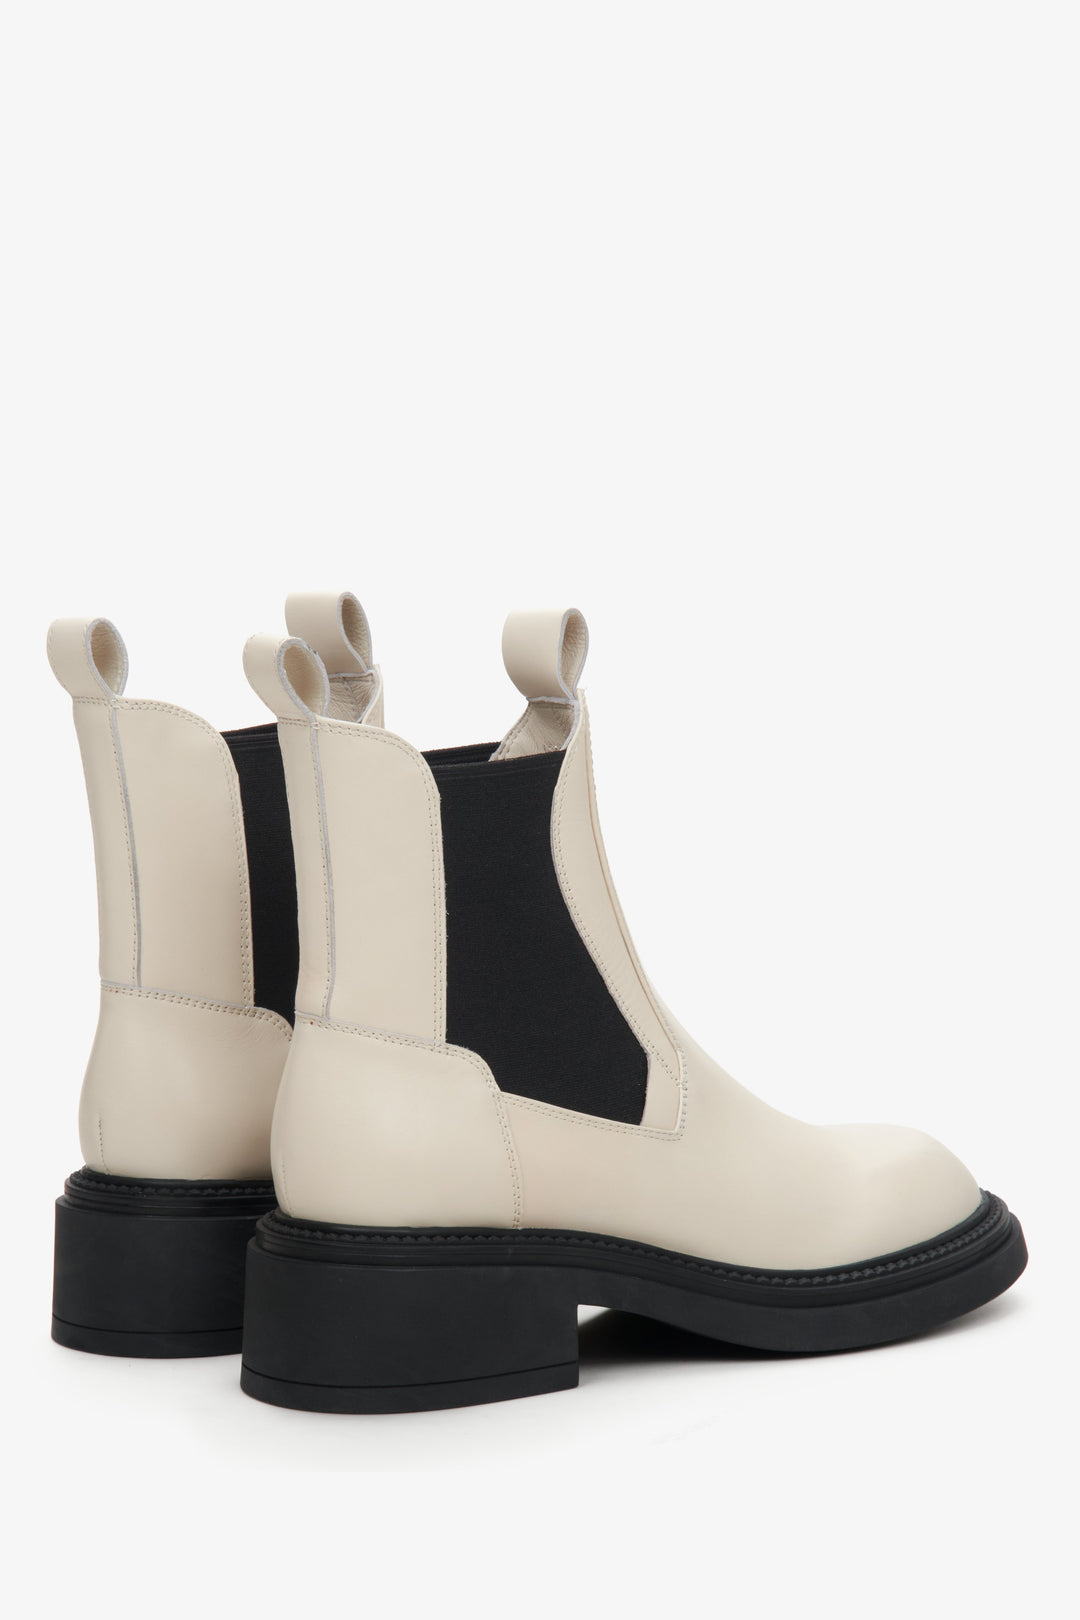 Women's beige and black leather Chelsea boots - a close-up on shoes' heel counter